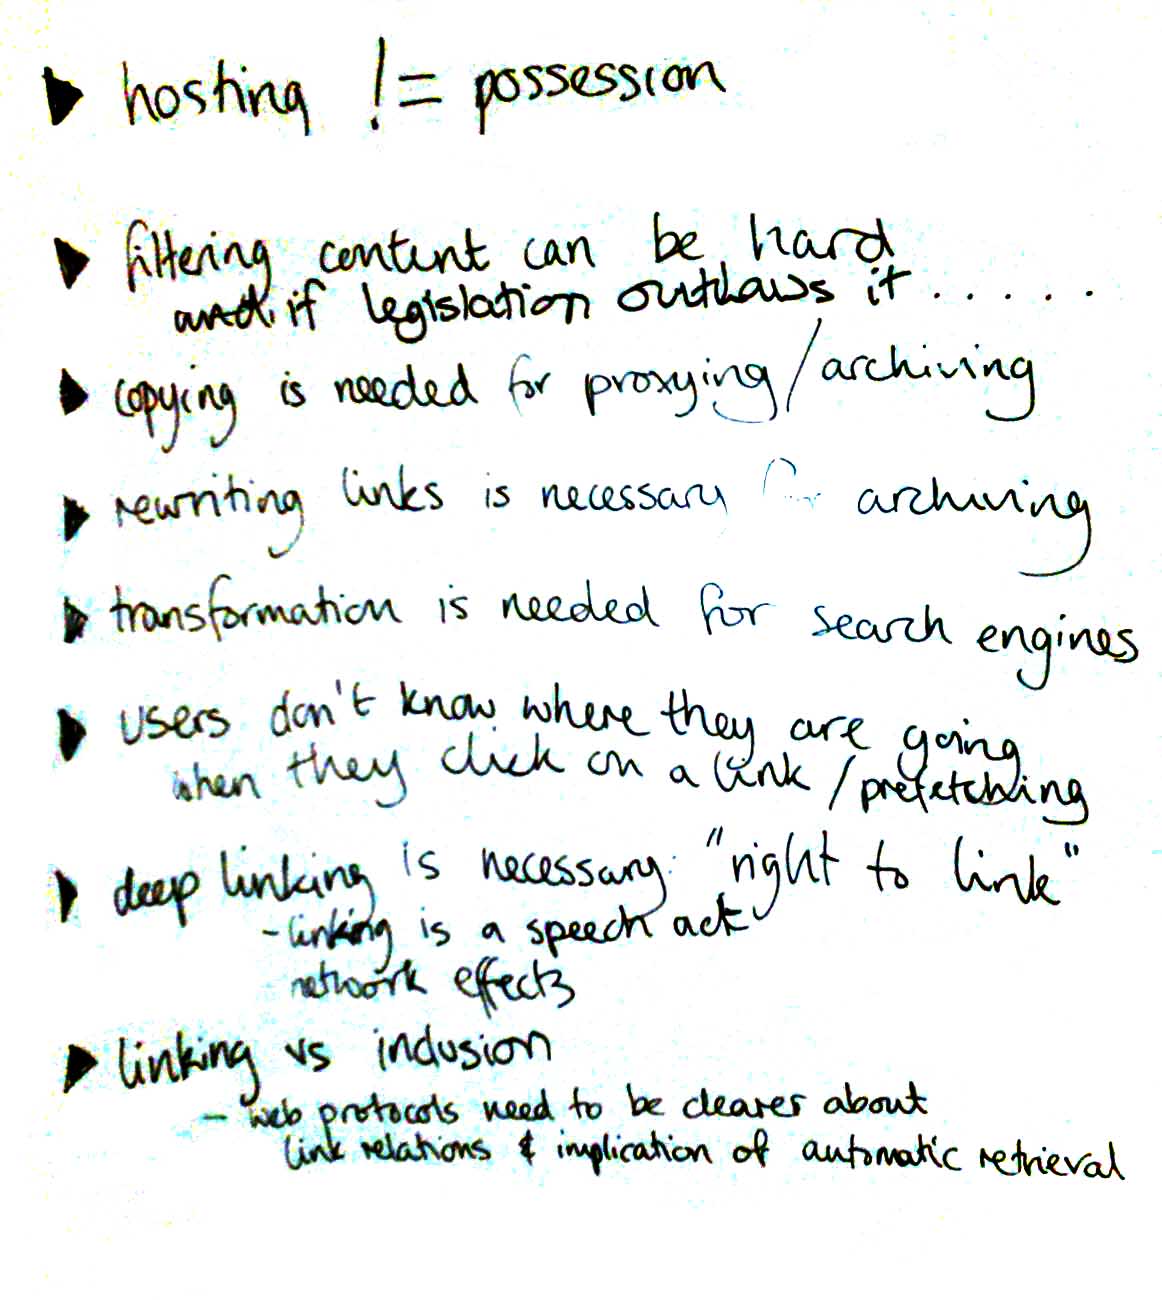 copyright linking session whiteboard